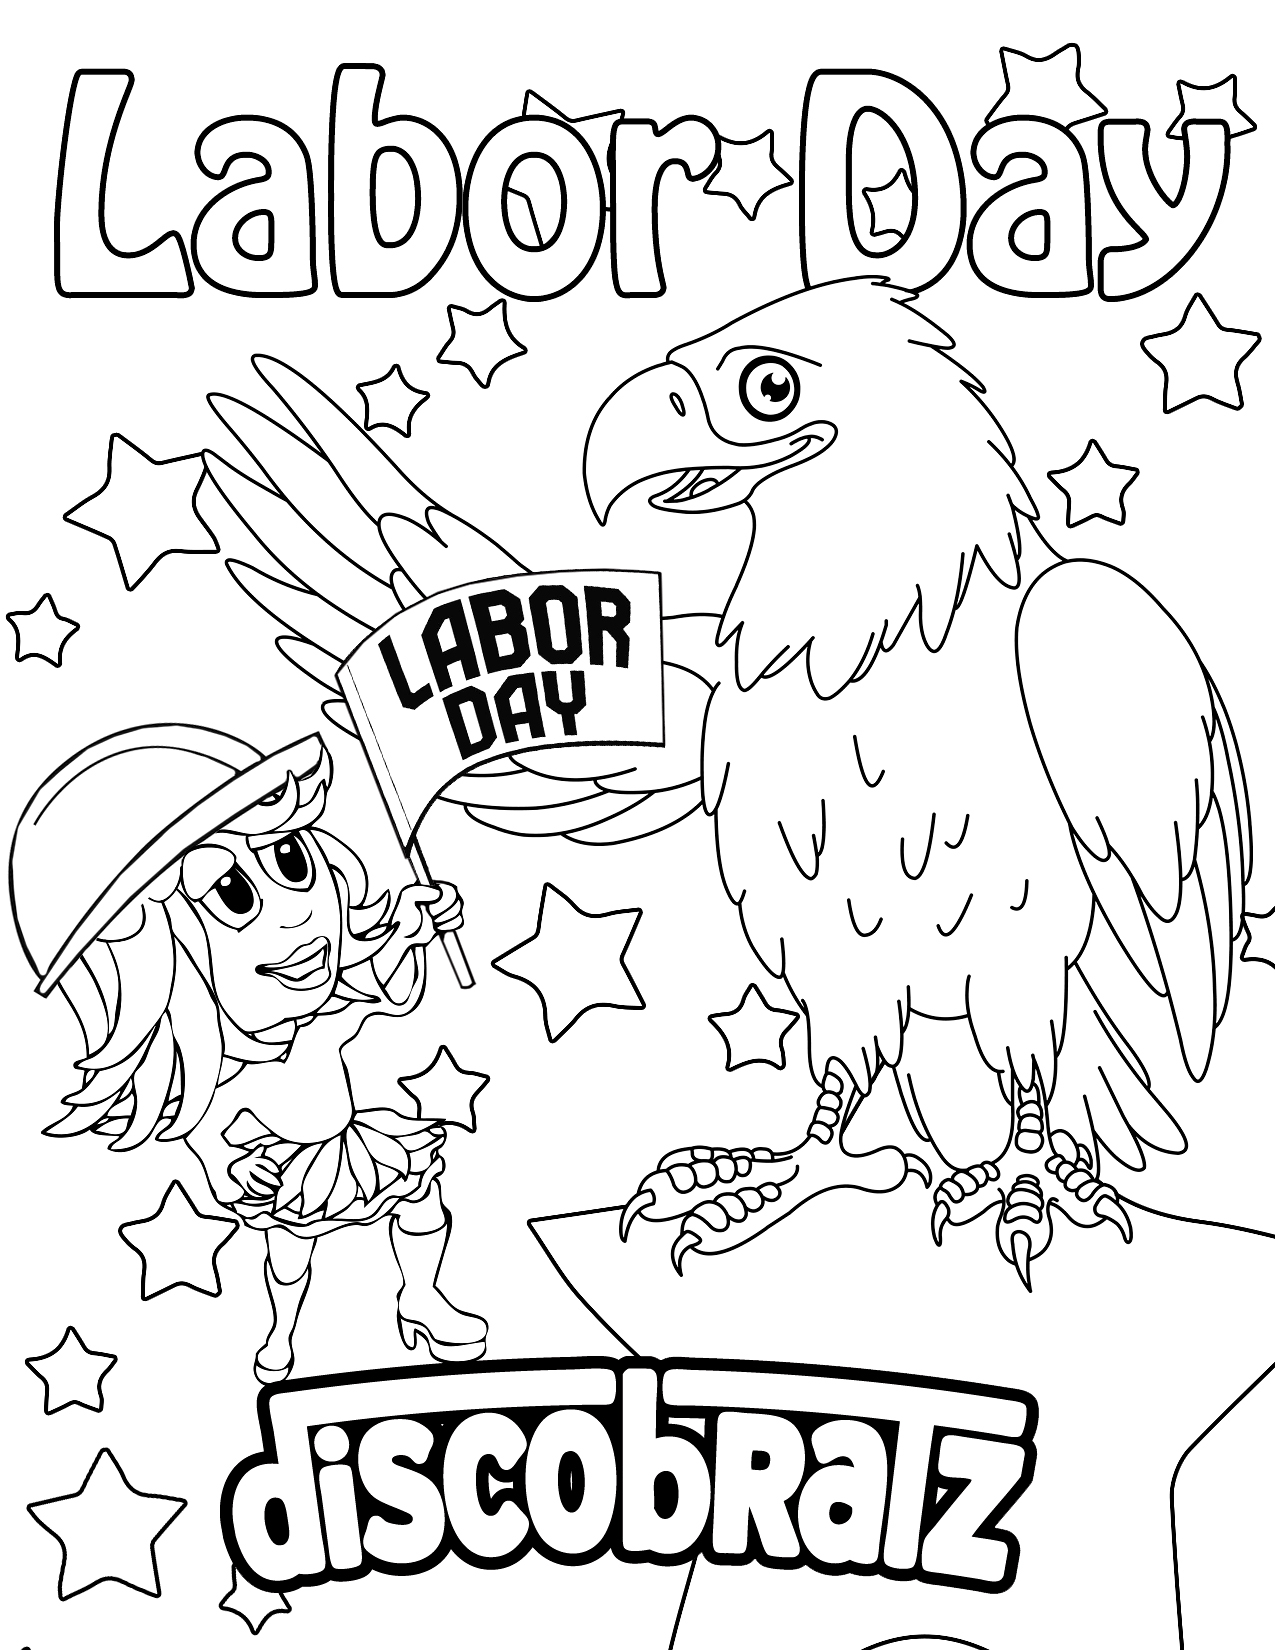 discobratz-celebrates-the-workers-of-the-world-with-a-labor-day